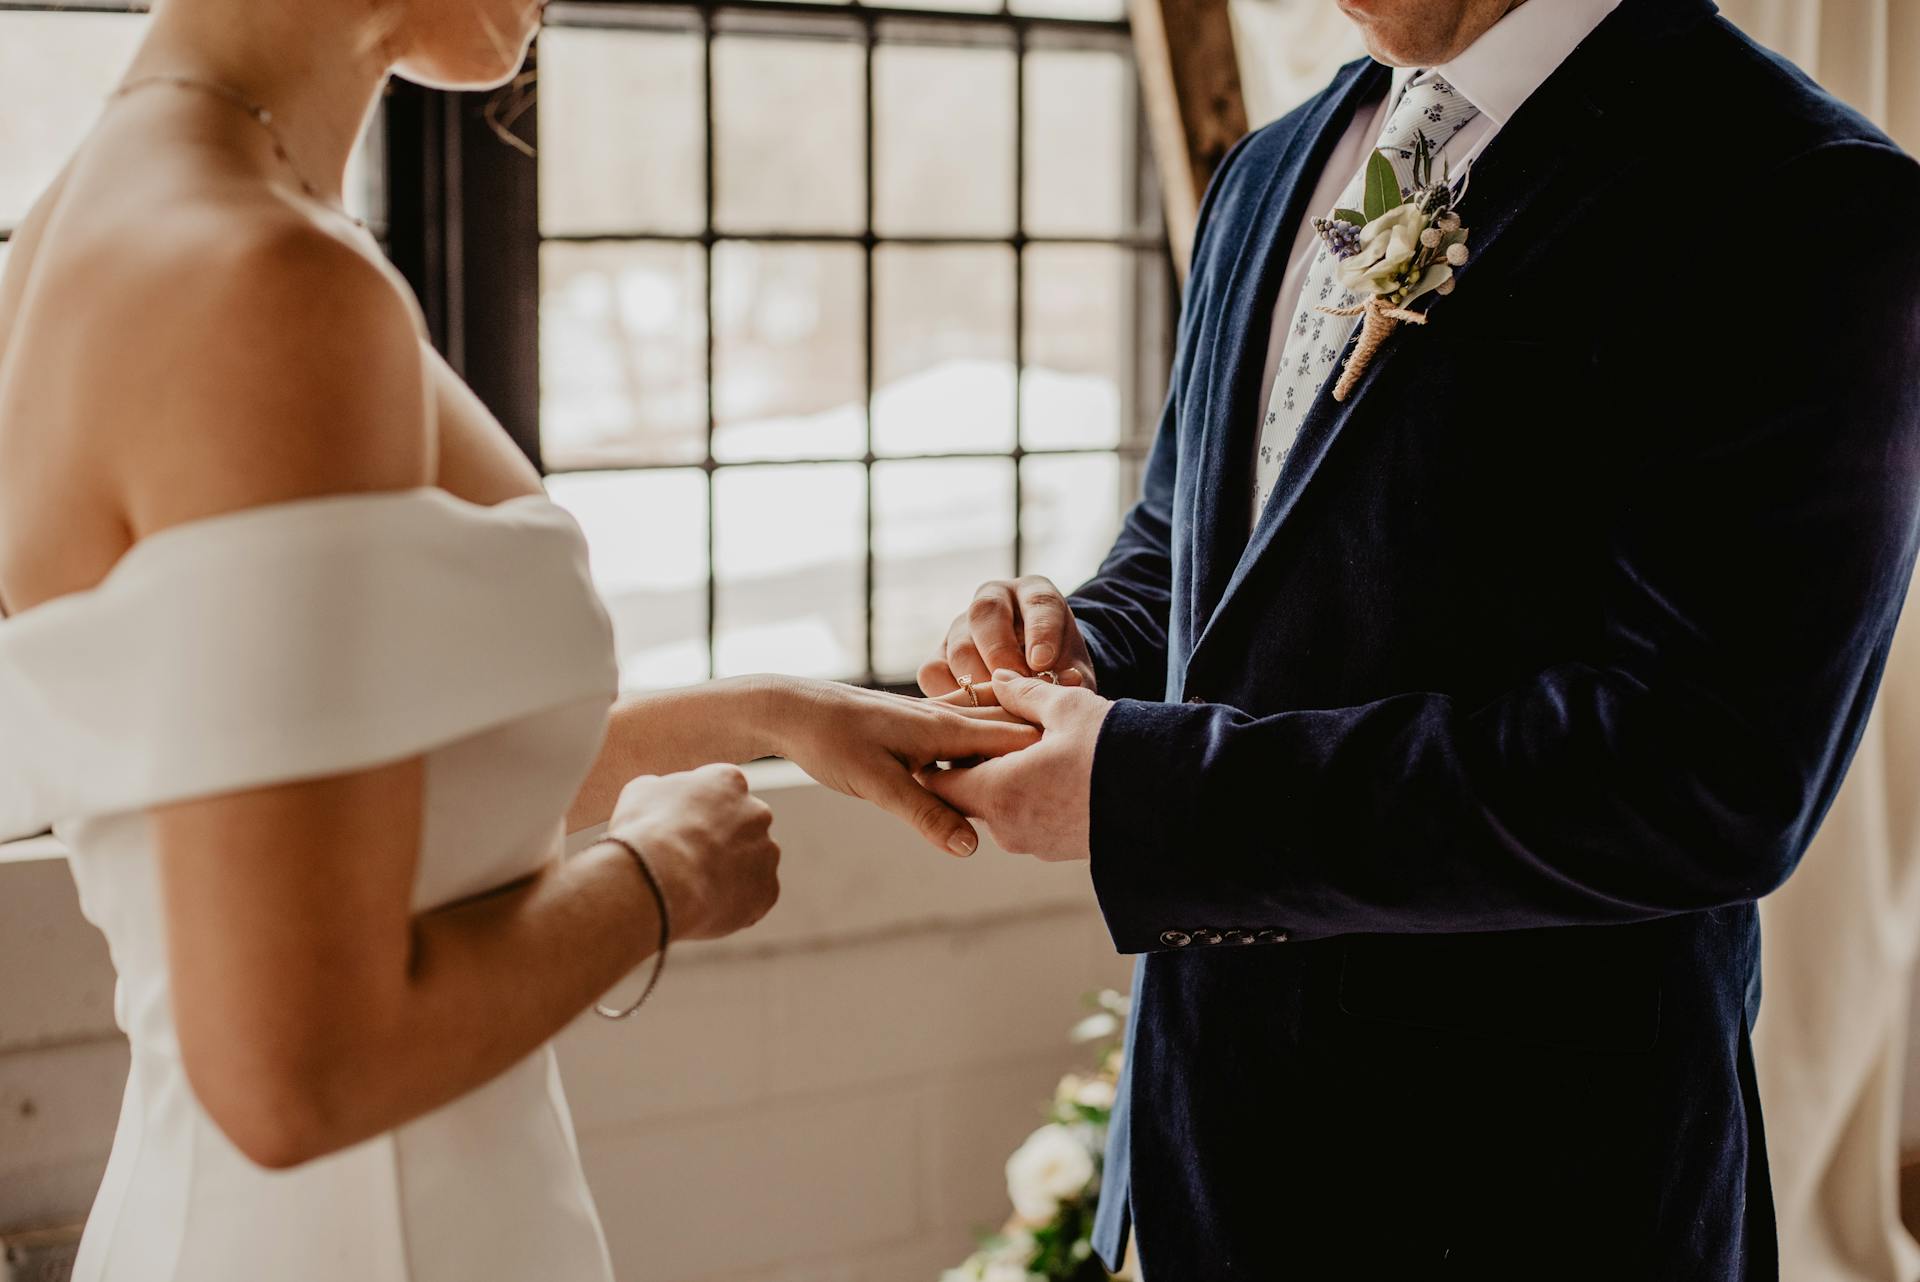 A couple getting married | Source: Pexels